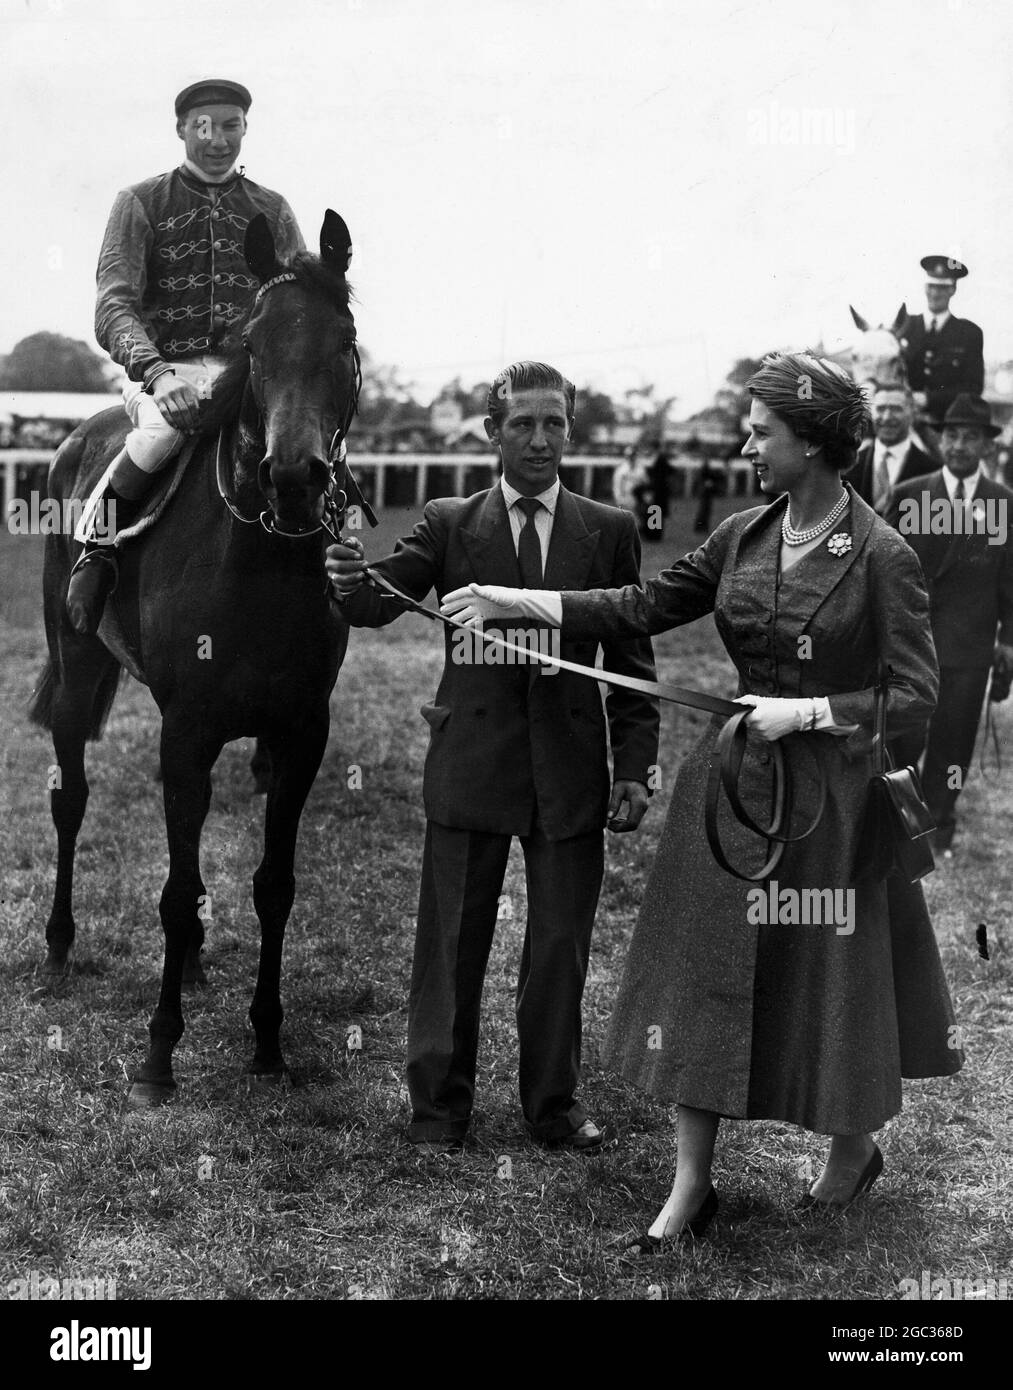 HM Queen Elizabeth II leads her horse Carrozza in after it has won the 179th Oaks Stakes, with Lester Piggott in the saddle. In a photo-finish, Silken Gilder, ridden by J Eddery, was given second, and Rose Royal II, the favourite with J Massard in the saddle, third. 7th June 1957 Stock Photo